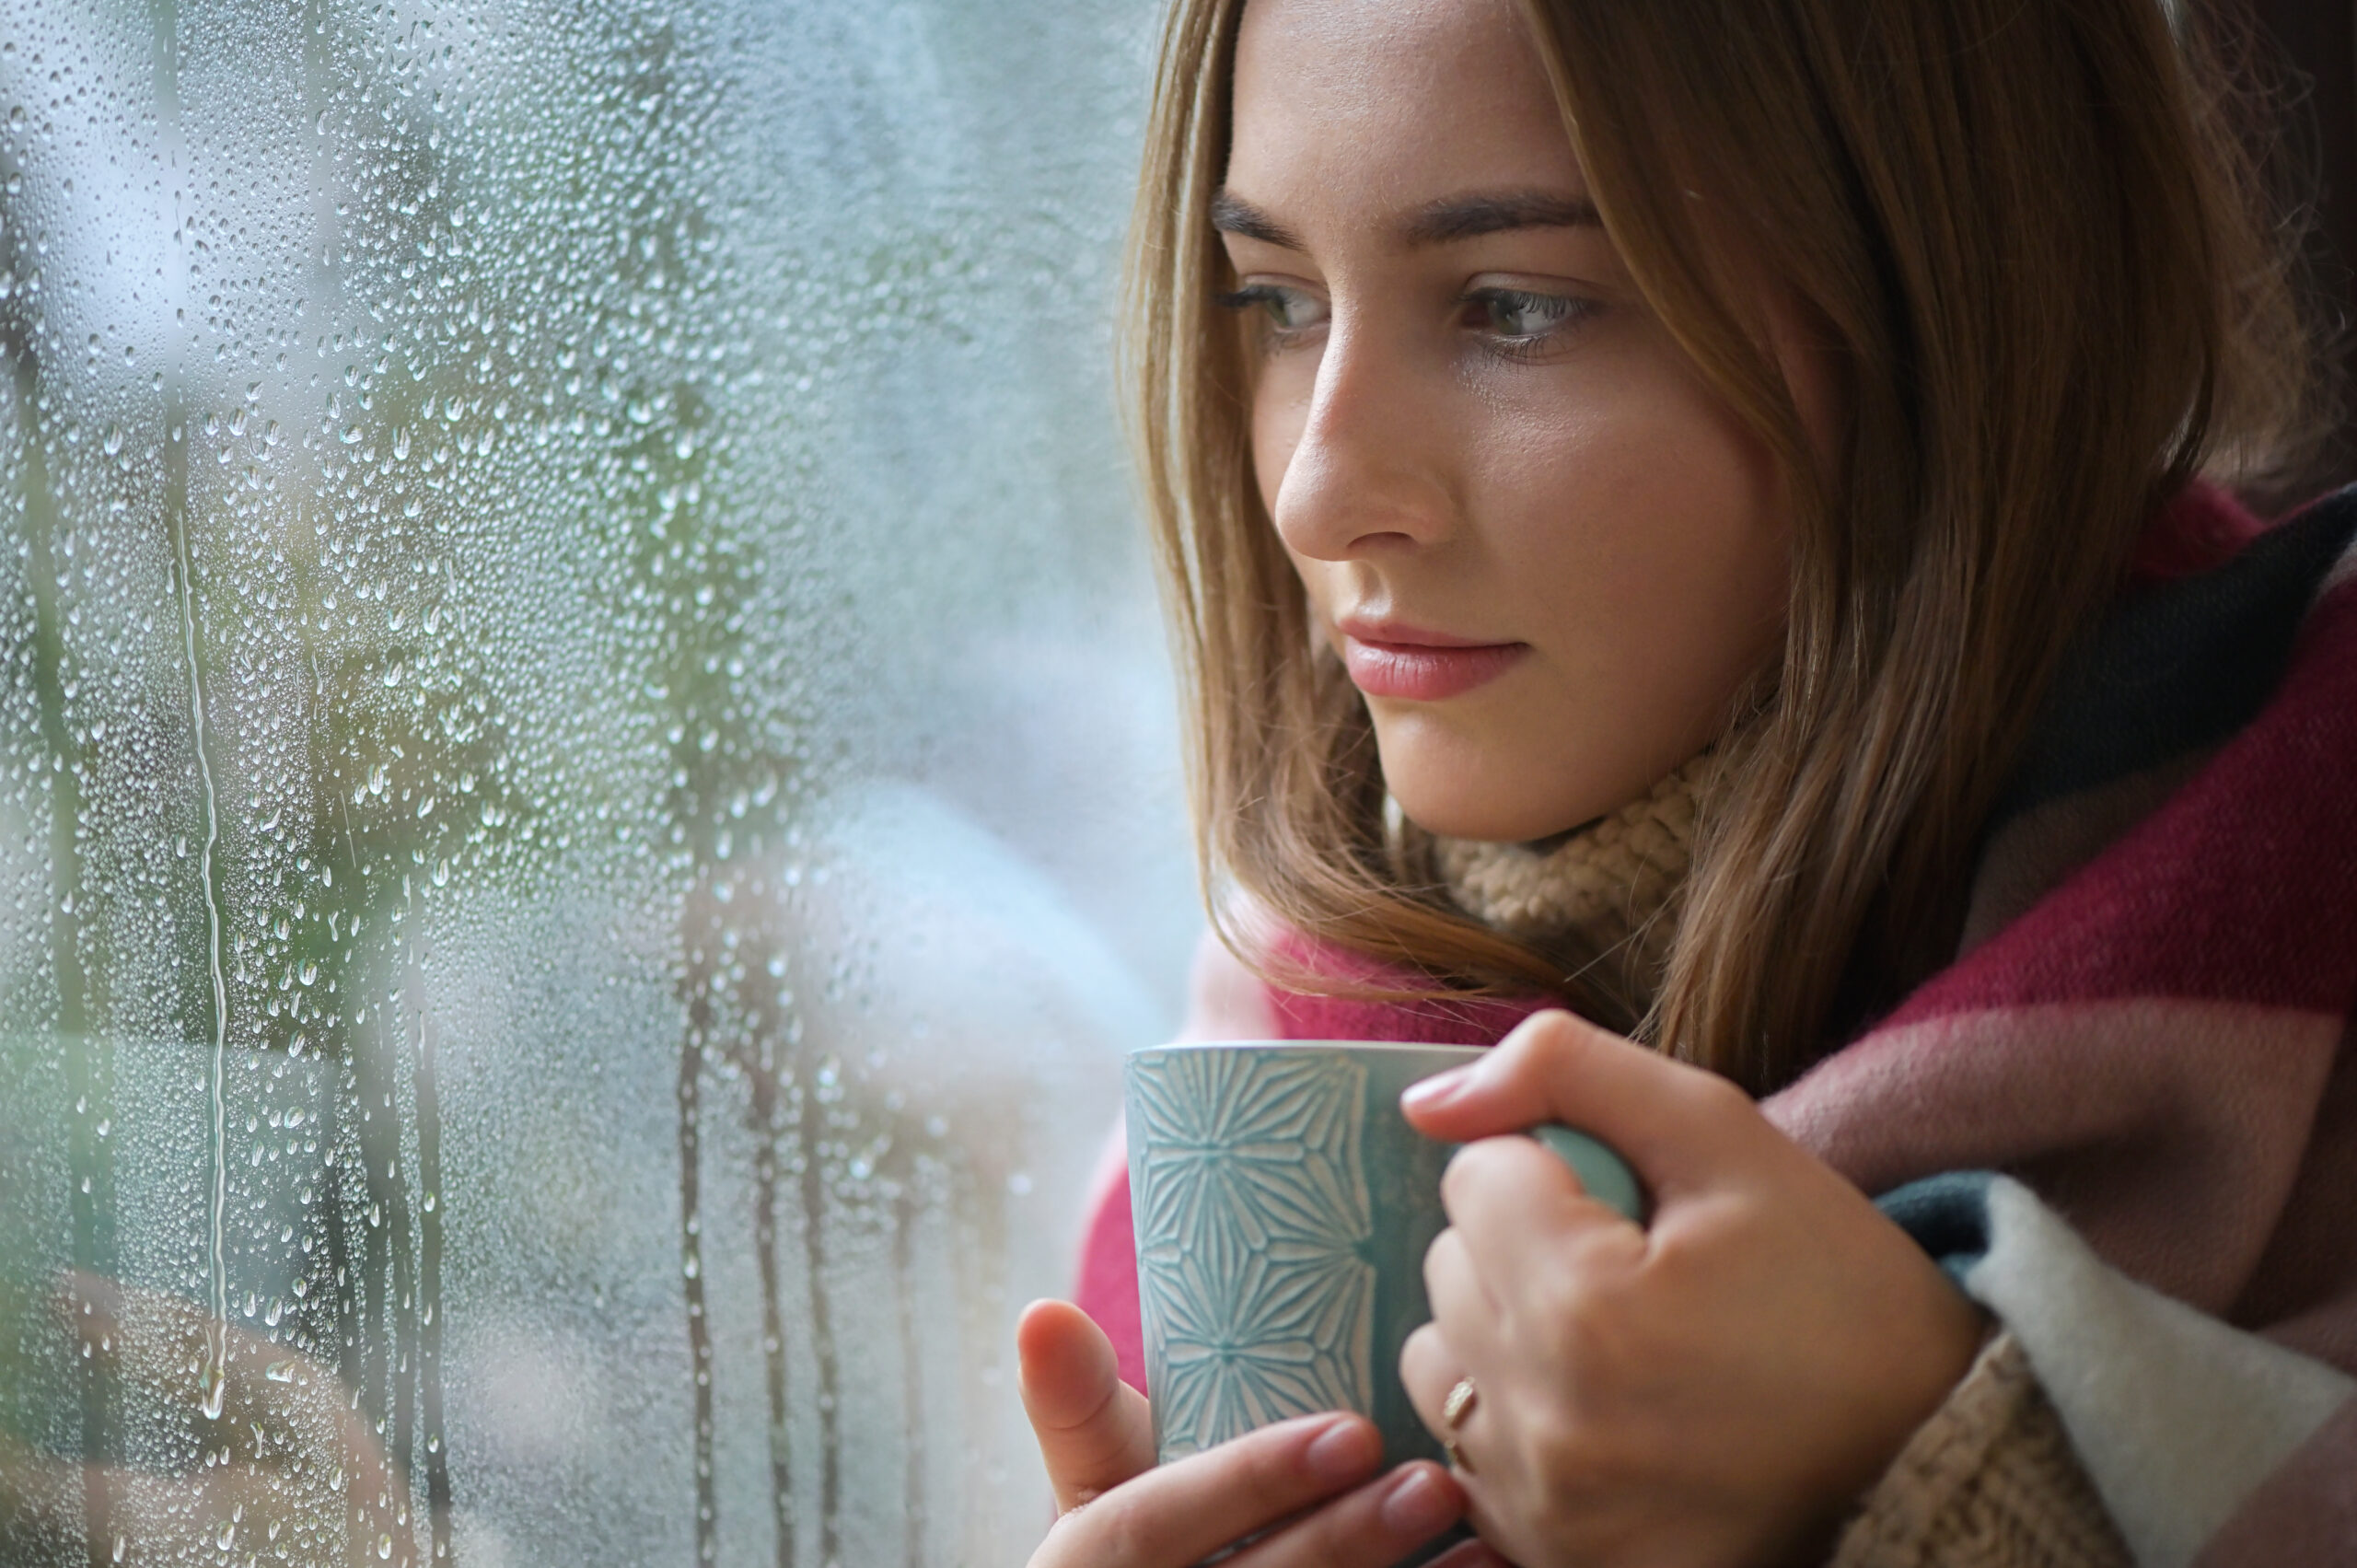 No one has to deal with seasonal depression alone. There are a plethora of treatments for seasonal depression that can help individuals to cope.